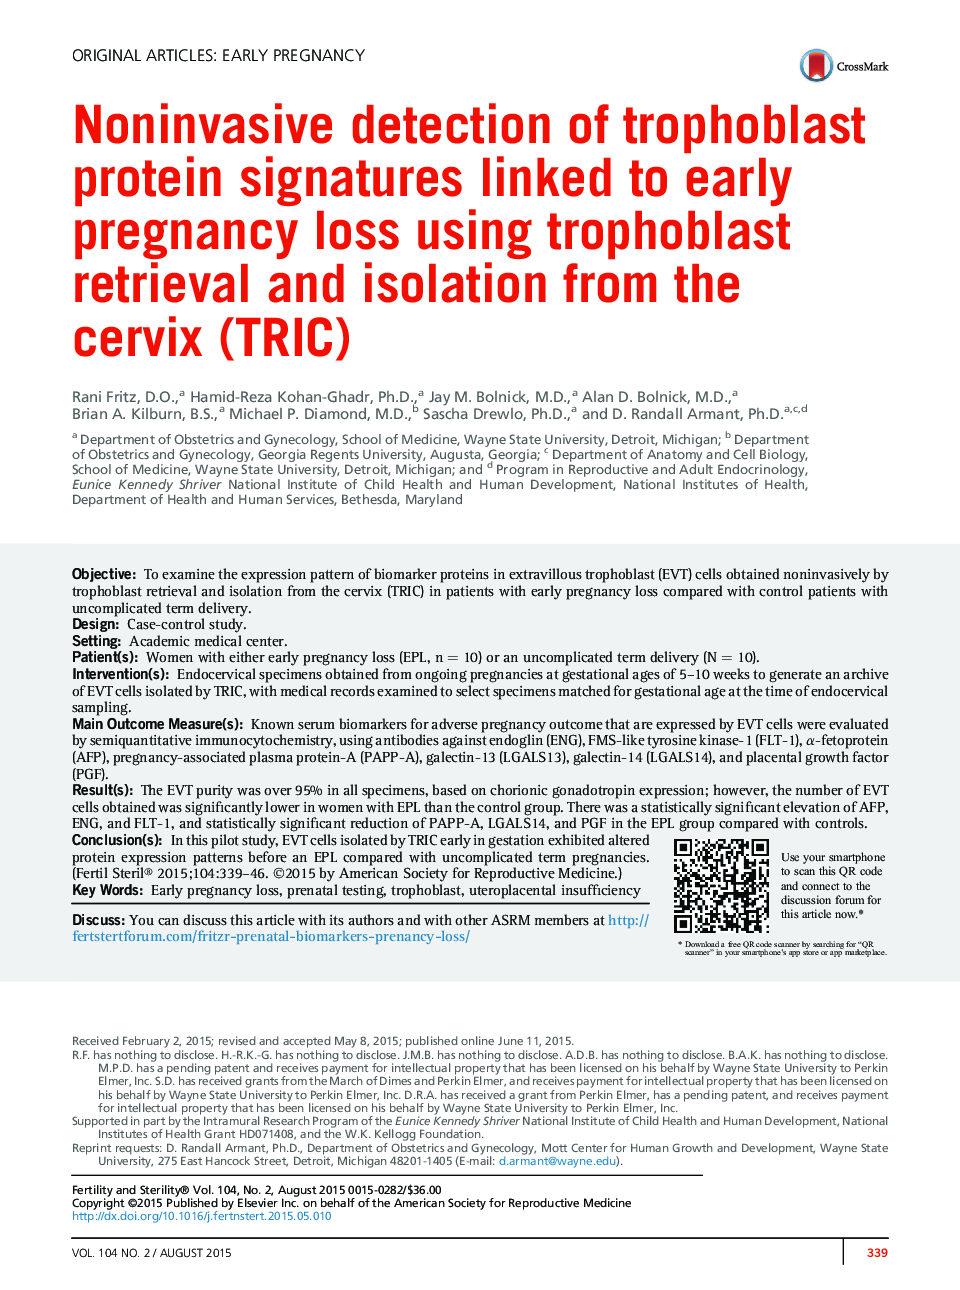 Noninvasive detection of trophoblast protein signatures linked to early pregnancy loss using trophoblast retrieval and isolation from the cervix (TRIC)